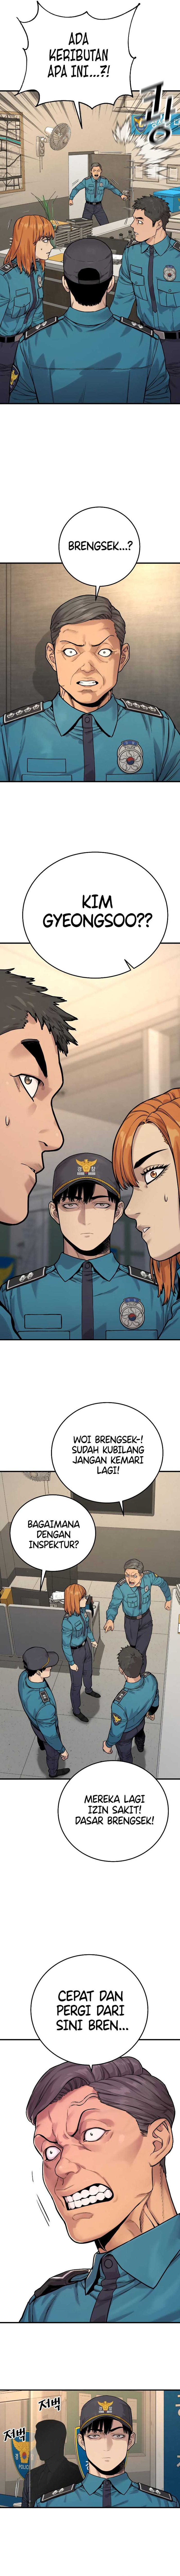 Return of the Bloodthirsty Police (Killer Cop) Chapter 03